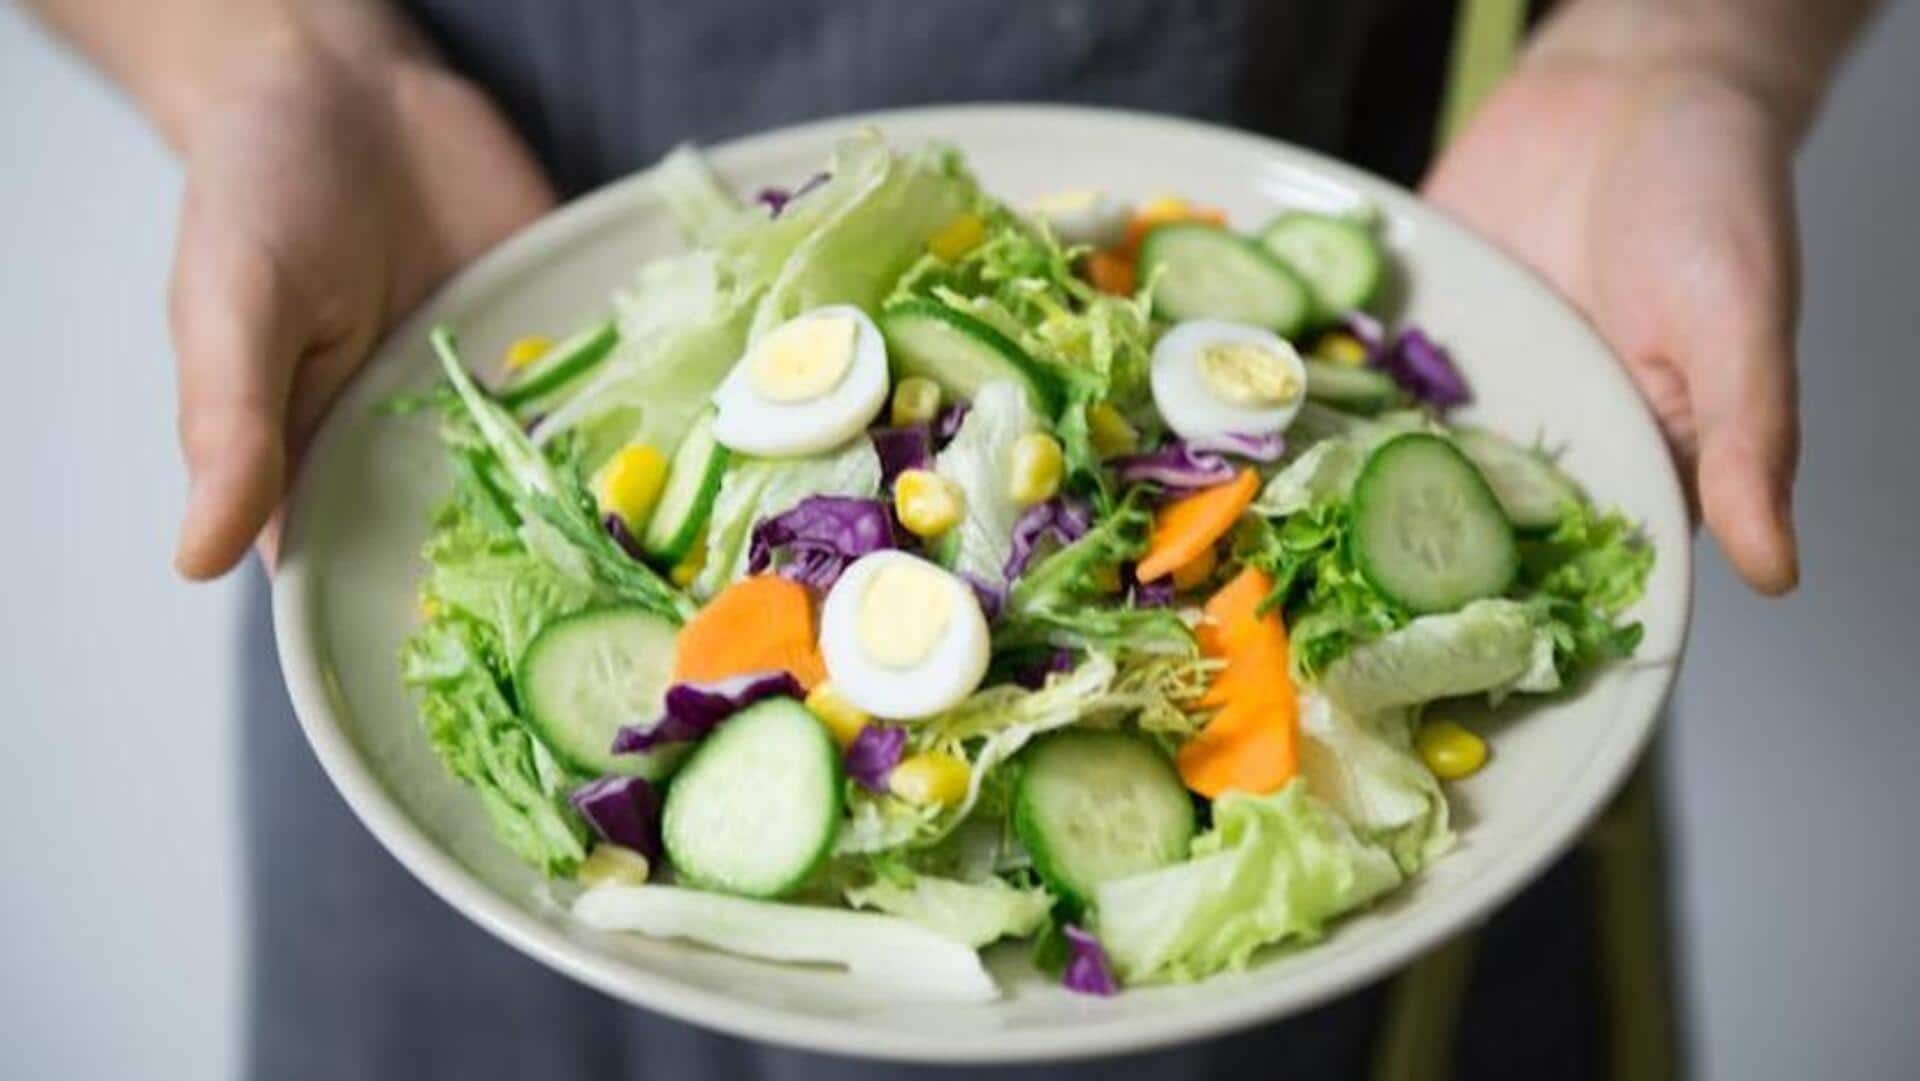 Nourish your gut with these wholesome vegan salads